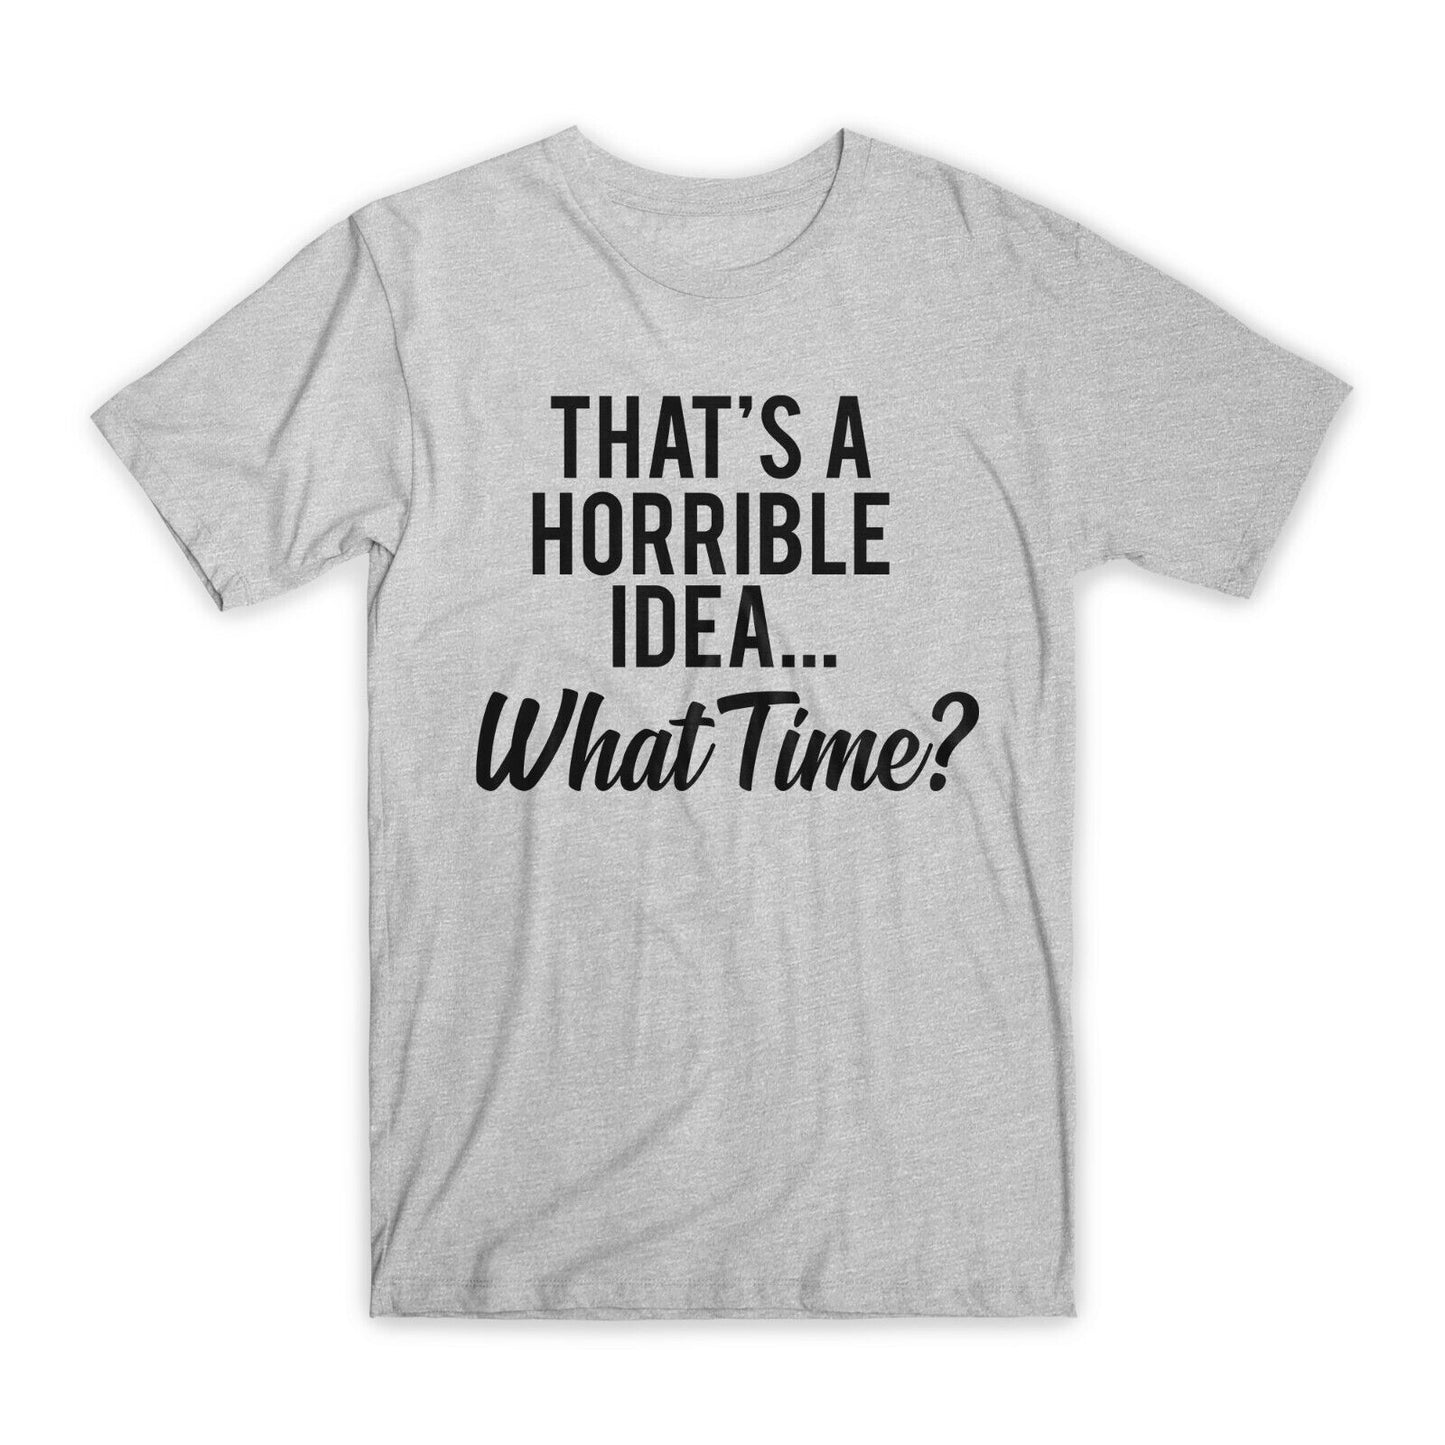 That's A Horrible Idea What Time T-Shirt Premium Soft Cotton Funny Tees Gift NEW